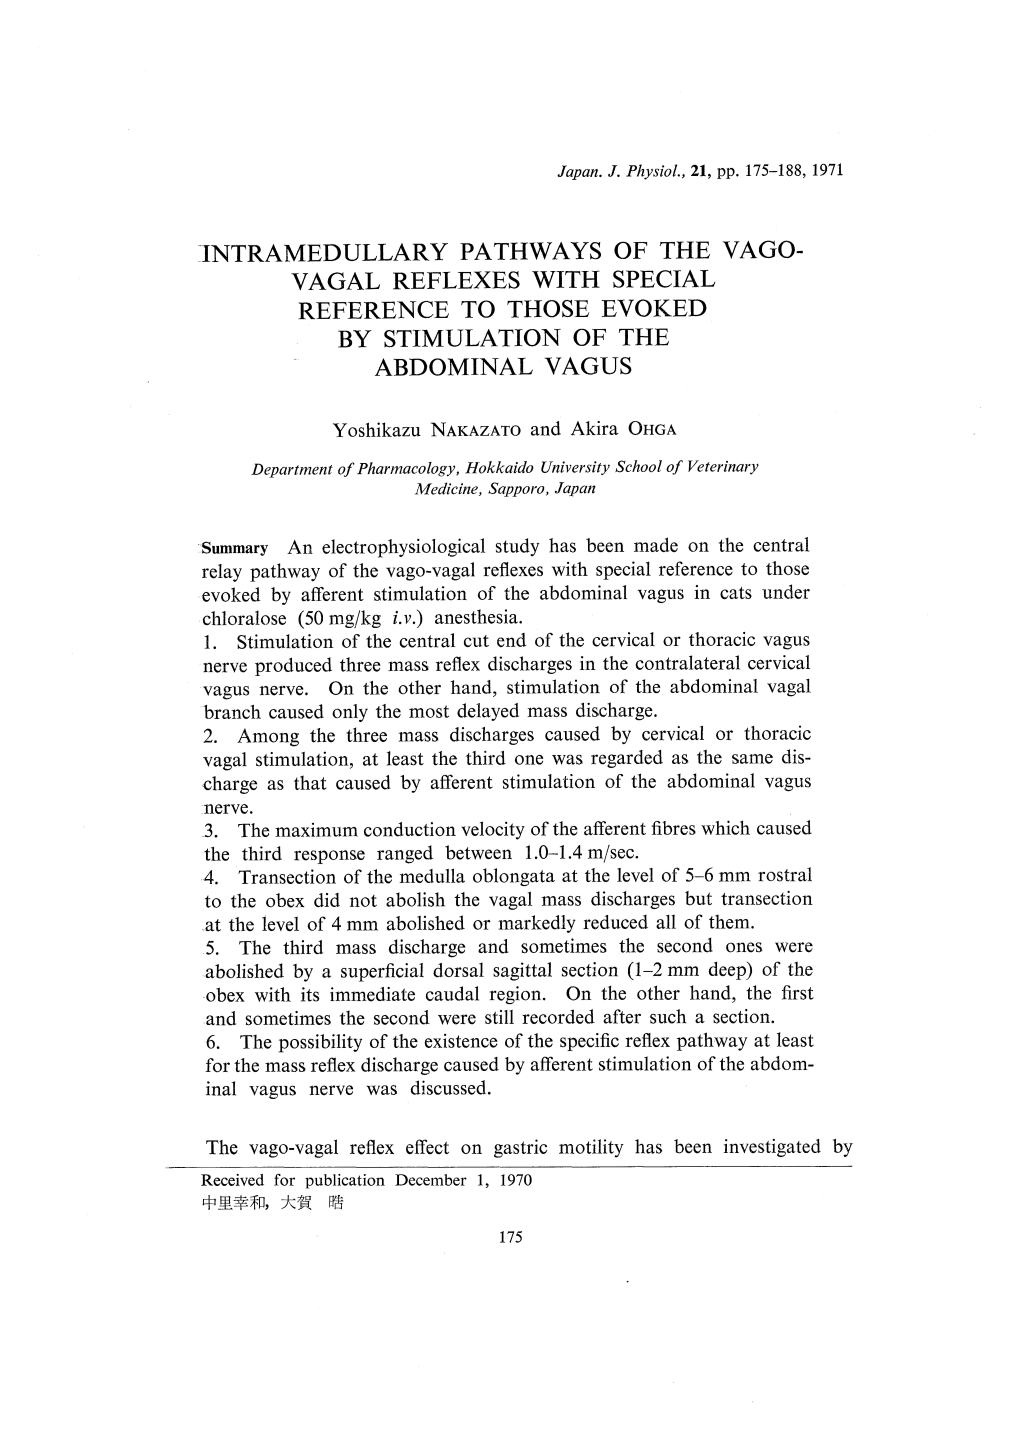 Intramedullary Pathways of the Vago- Vagal Reflexes with Special Reference to Those Evoked by Stimulation of the Abdominal Vagus